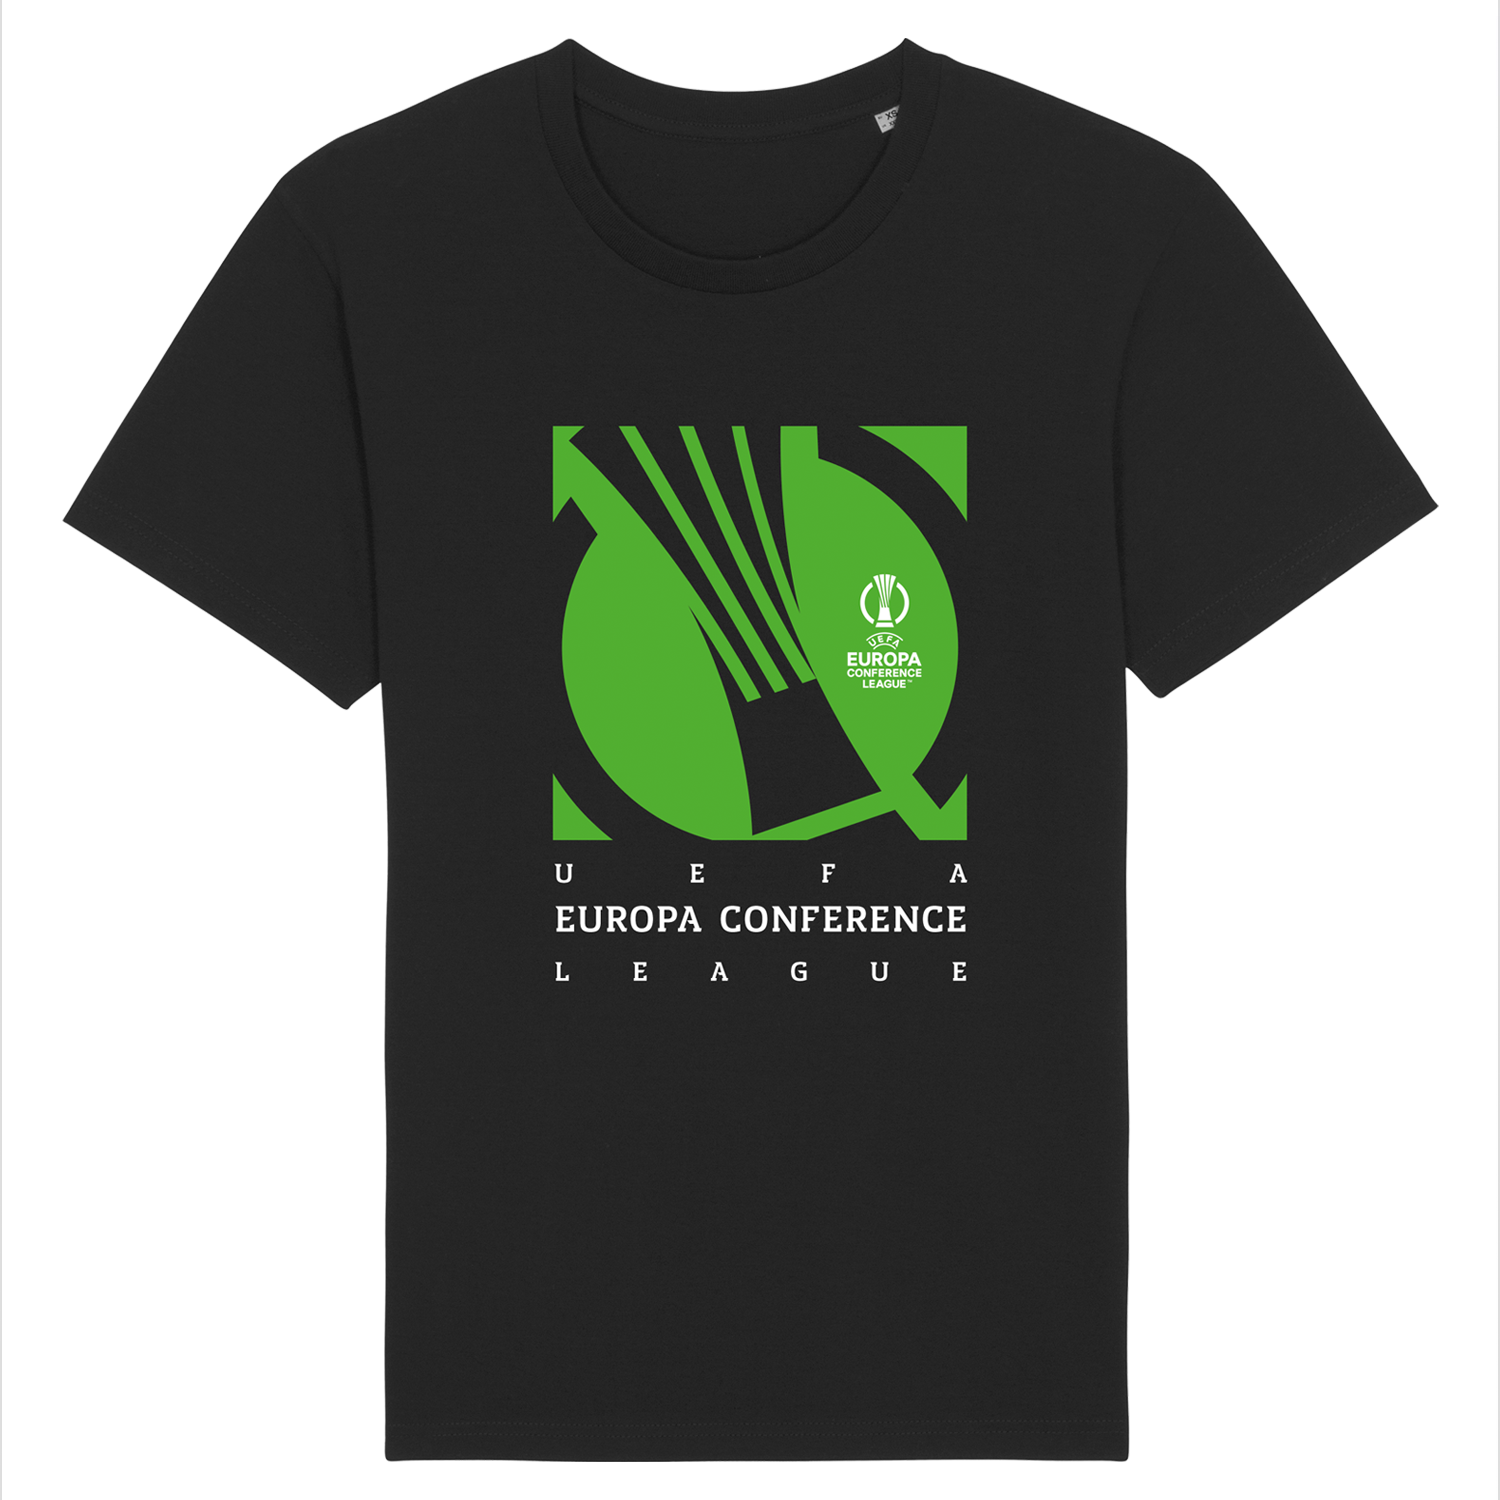 UEFA Europa Conference League - Slanted Badge Black T-Shirt UEFA Club Competitions Online Store